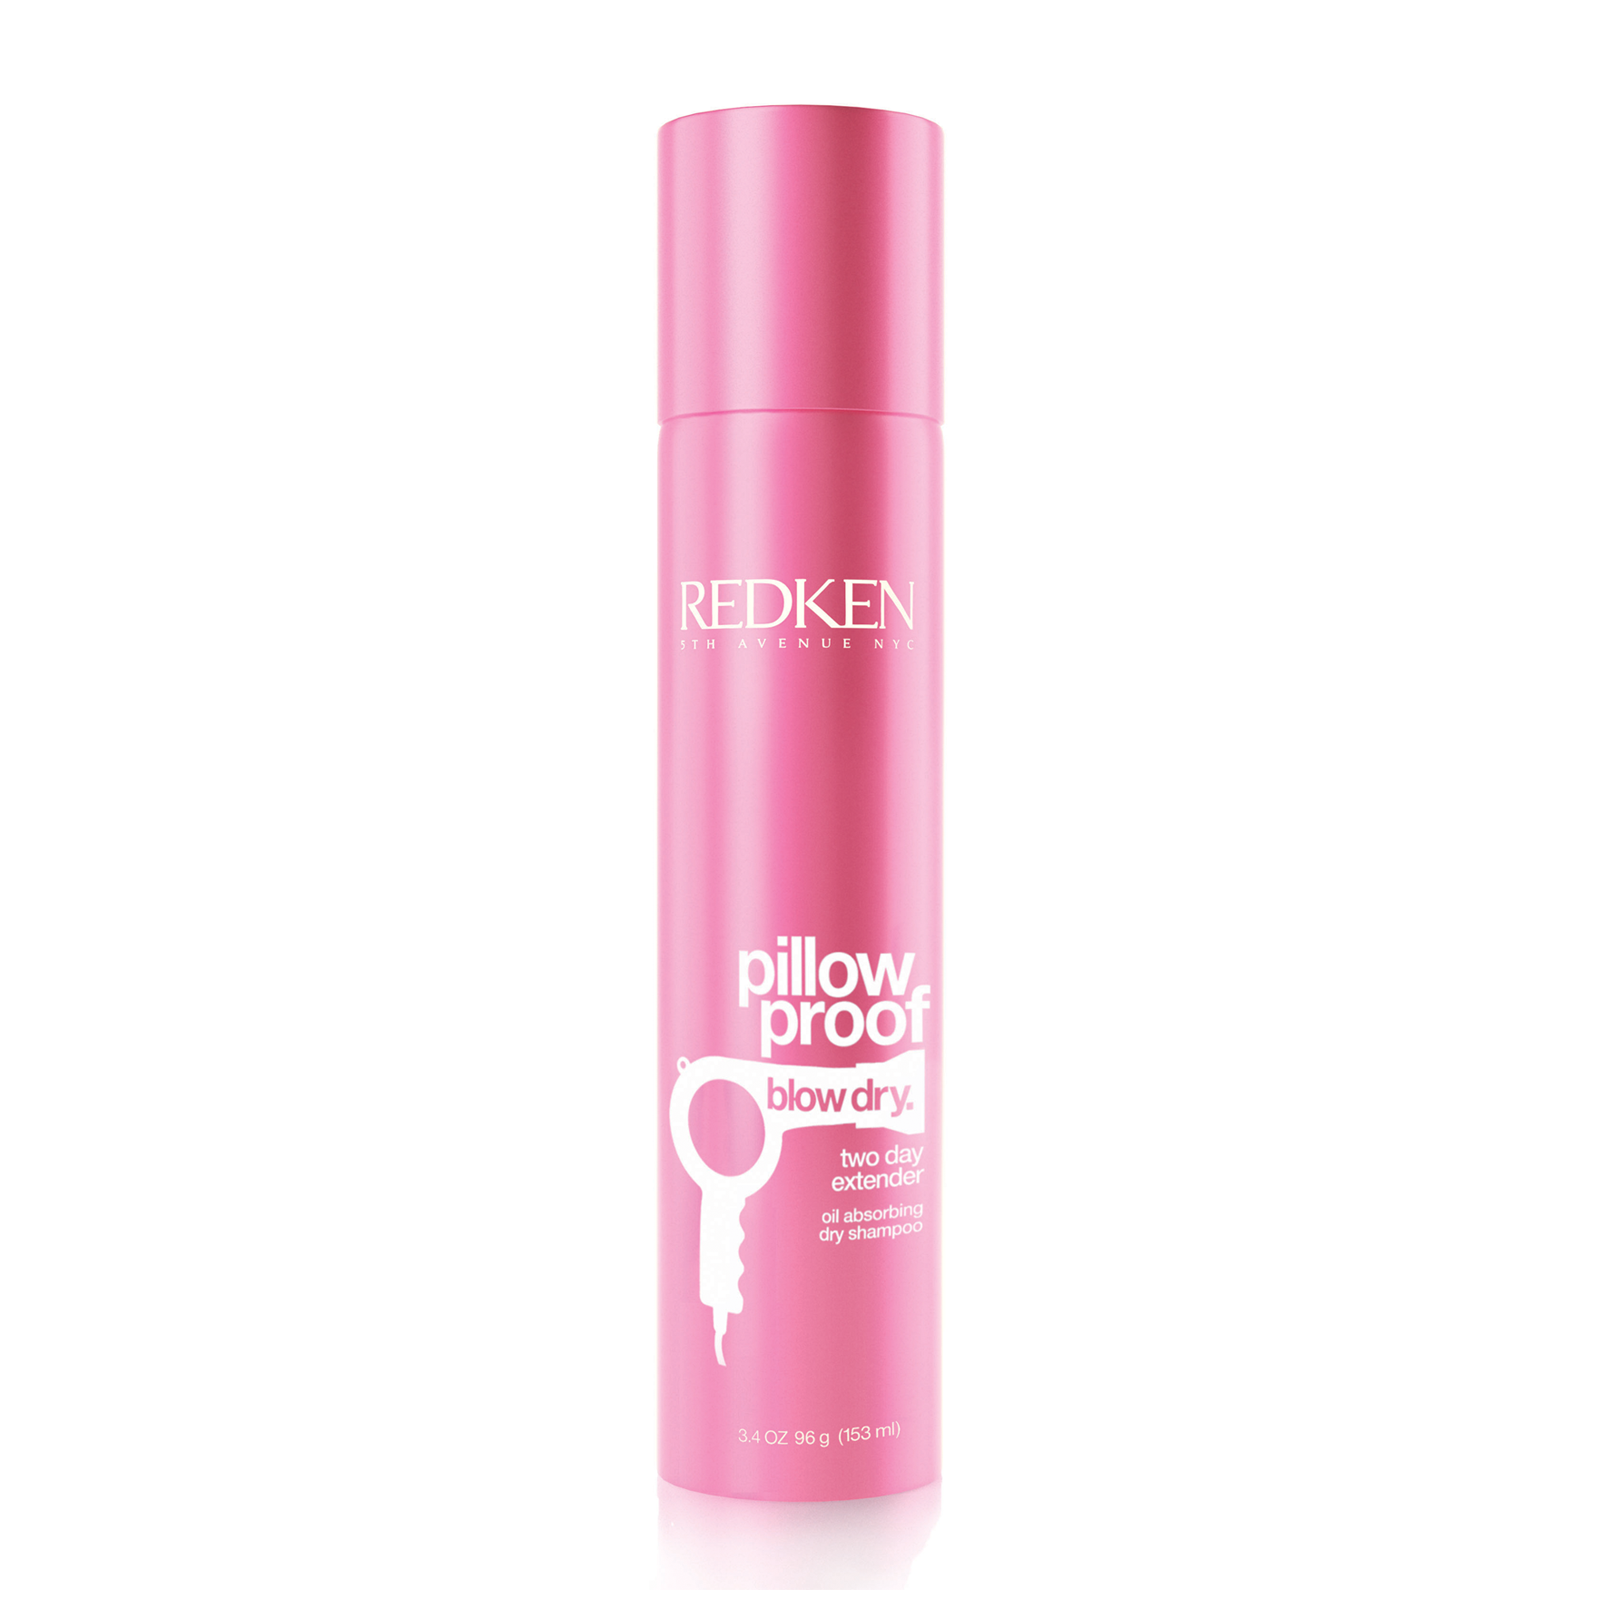 Redken Pillow Proof Blow Dry Two Day Extender 3oz